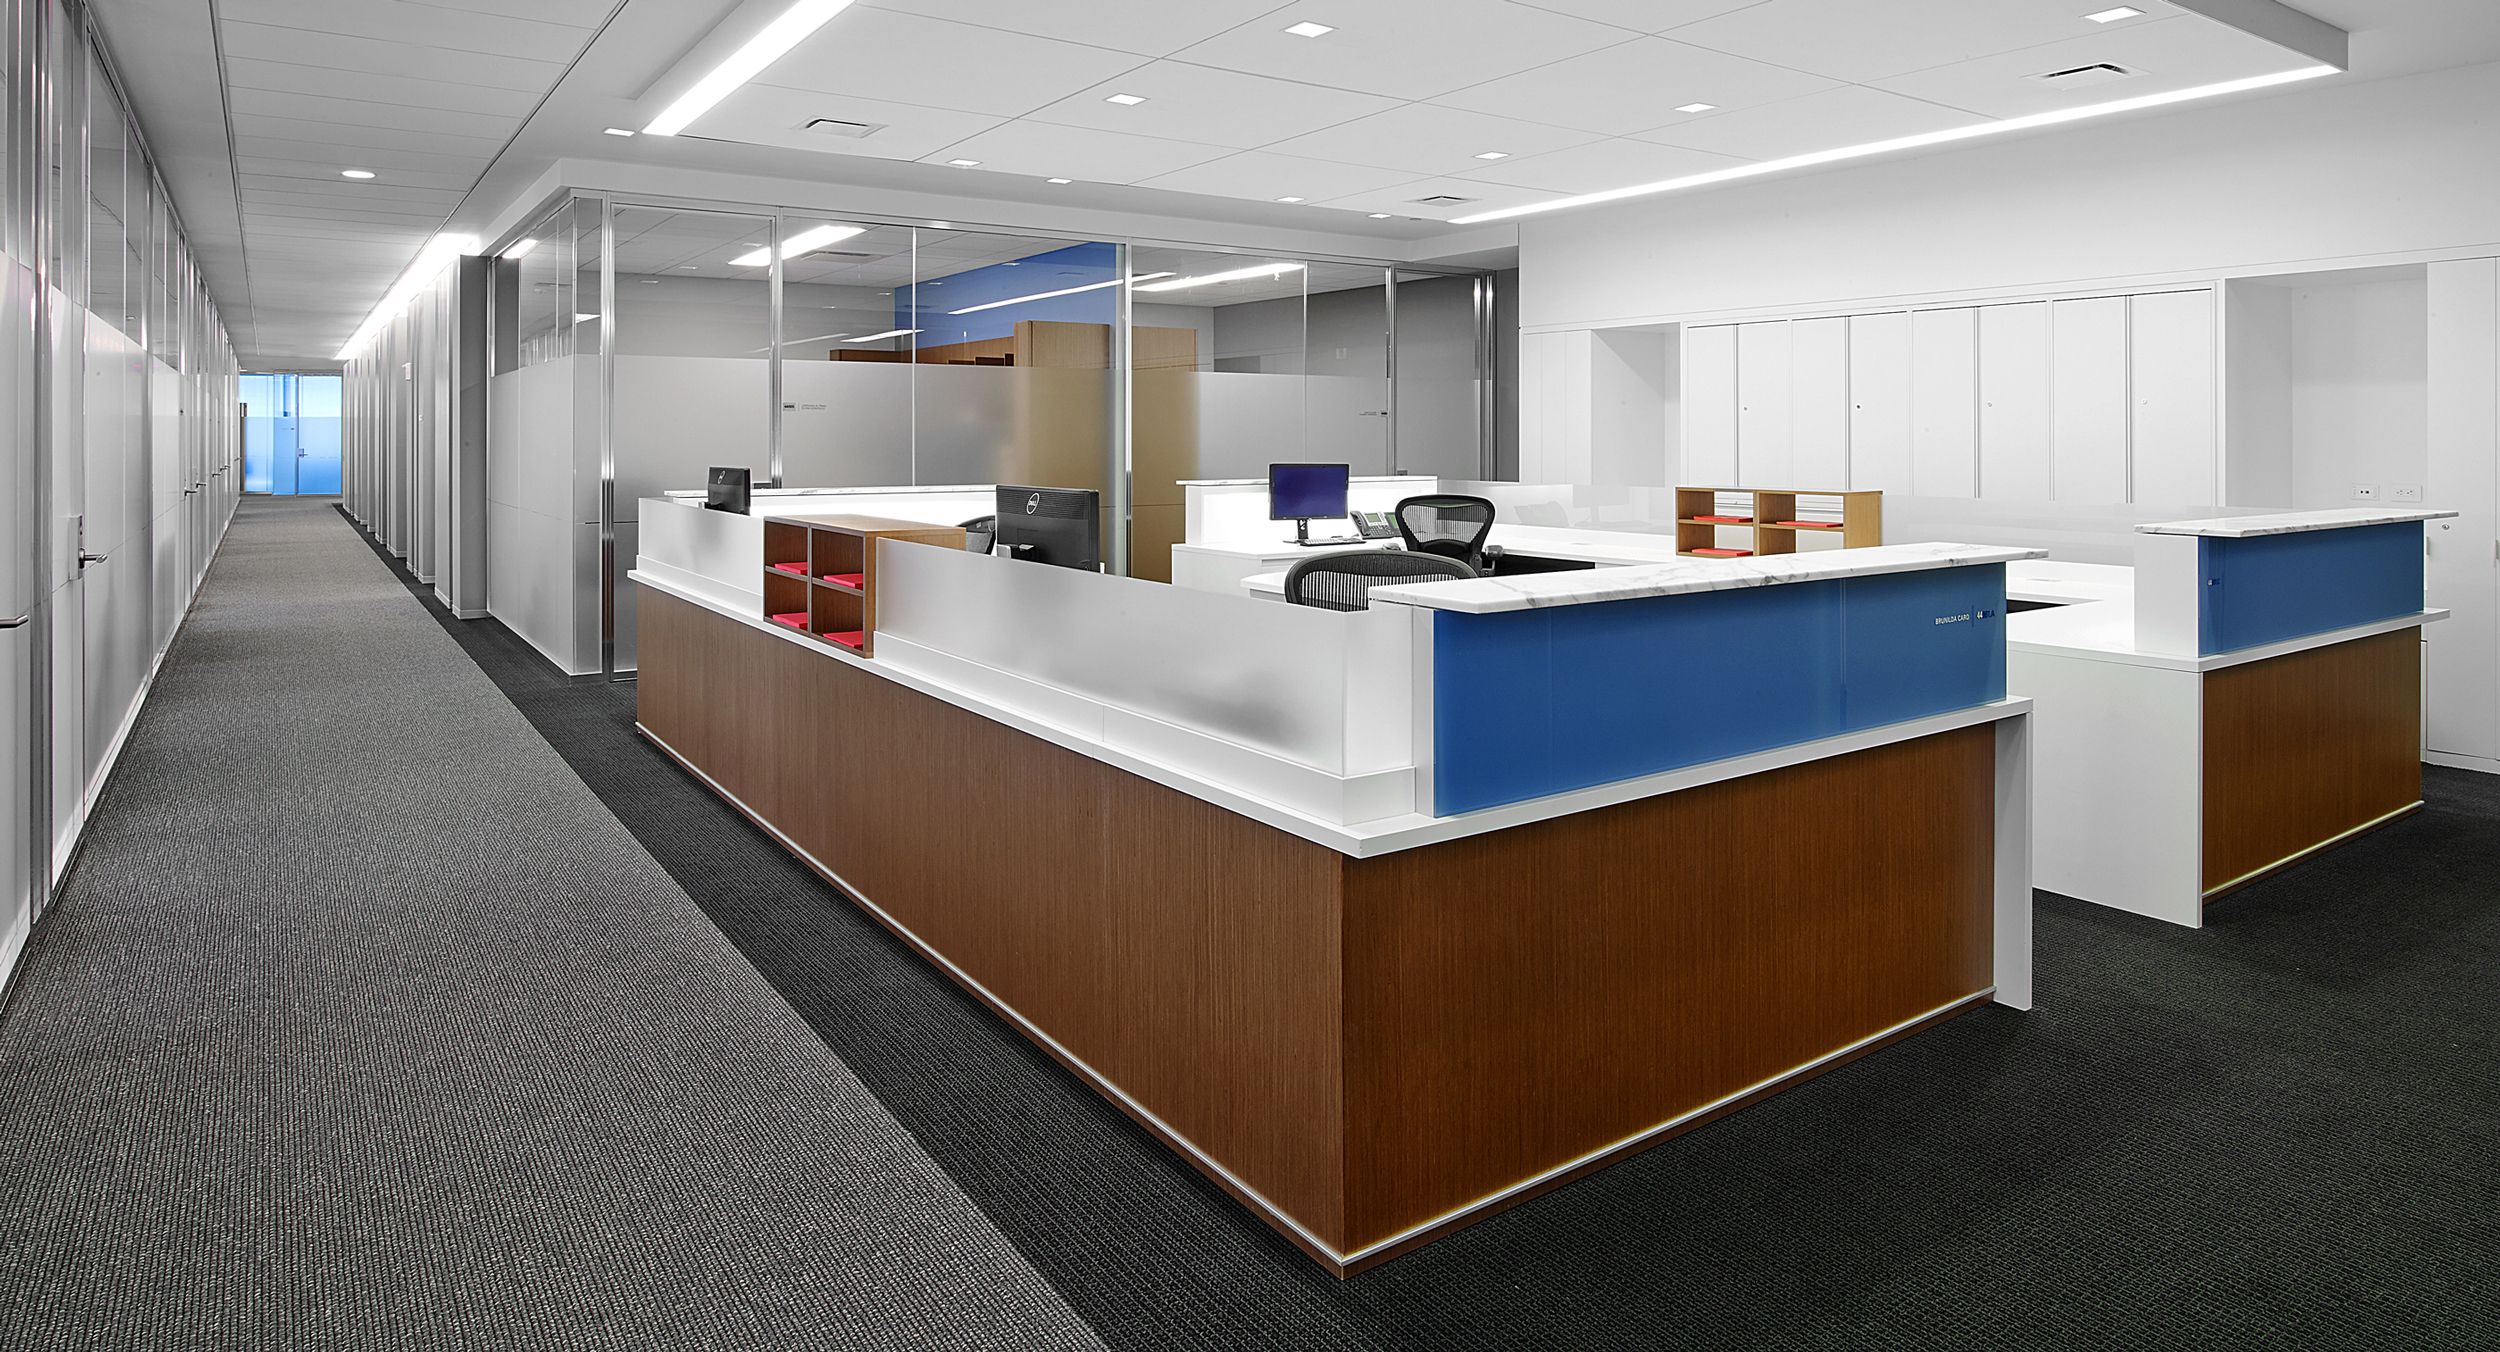 Administrative stations integrate a wide variety of materials:  Stone, tinted glass, acrylic, veneer, laminate, and satin aluminum.